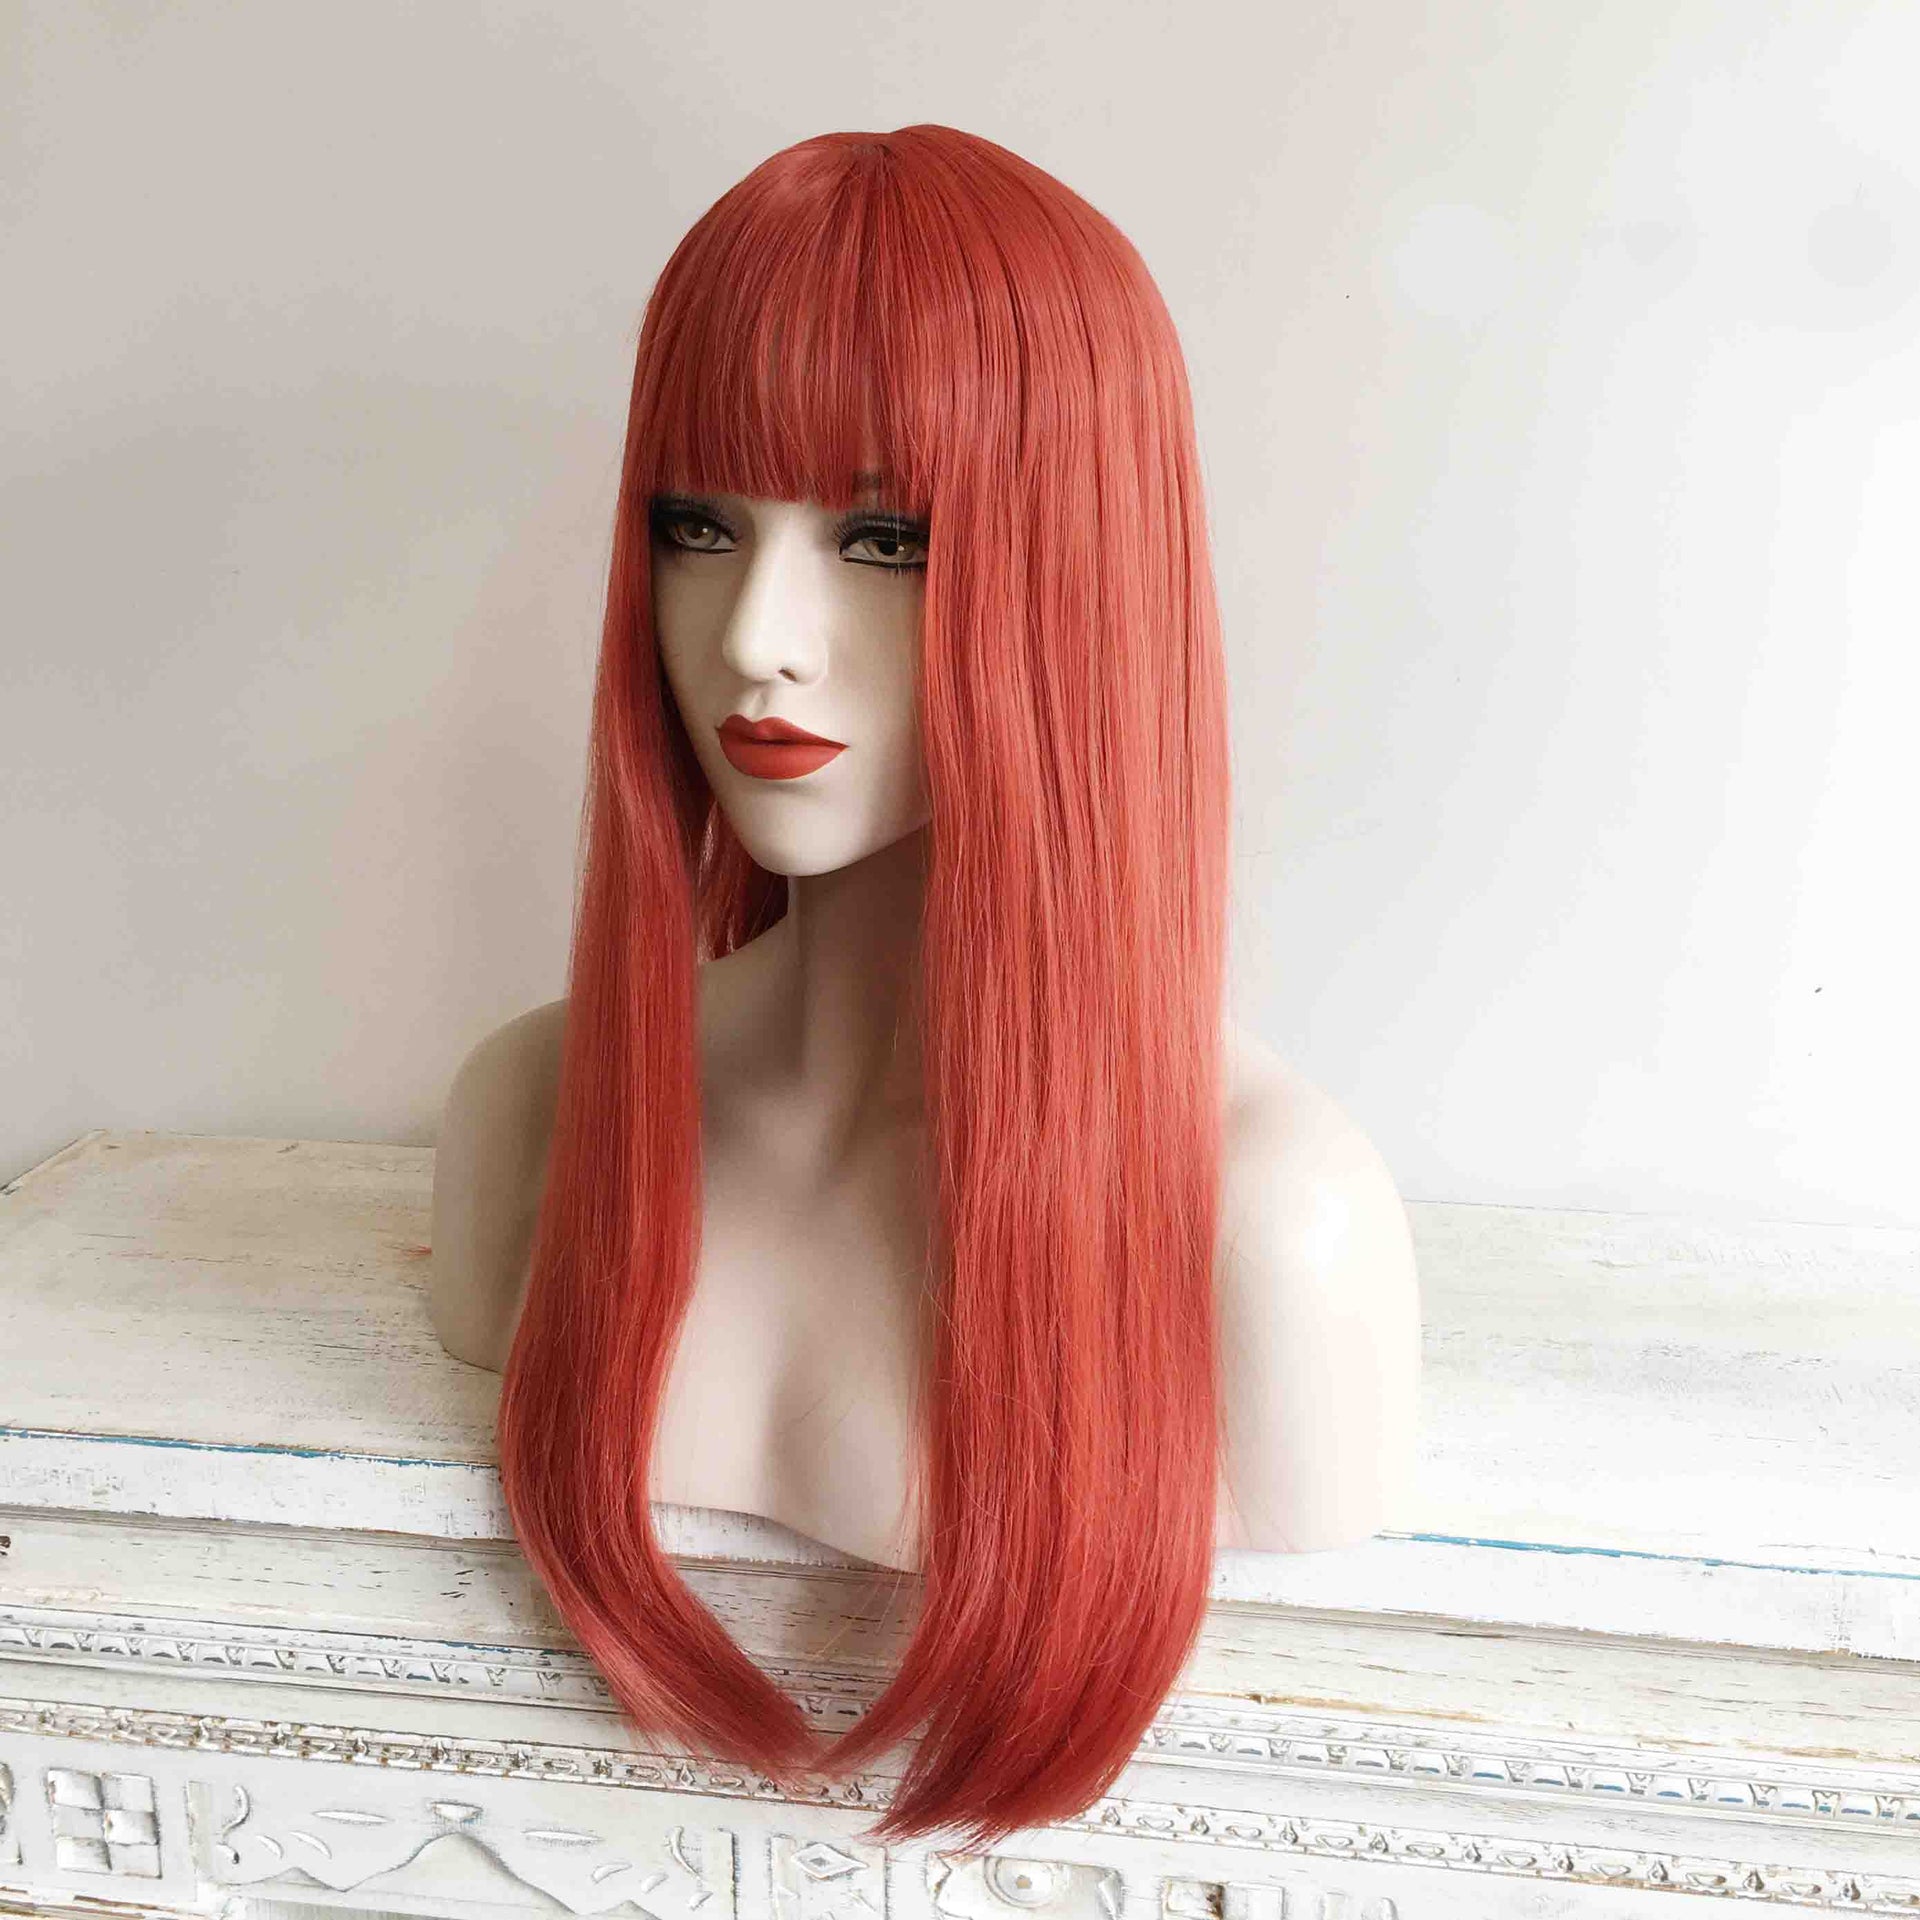 nevermindyrhead Blonde Ombre Long Straight Wig With Fringe Bangs Top Skin 4 Colours For Women 24 Inches